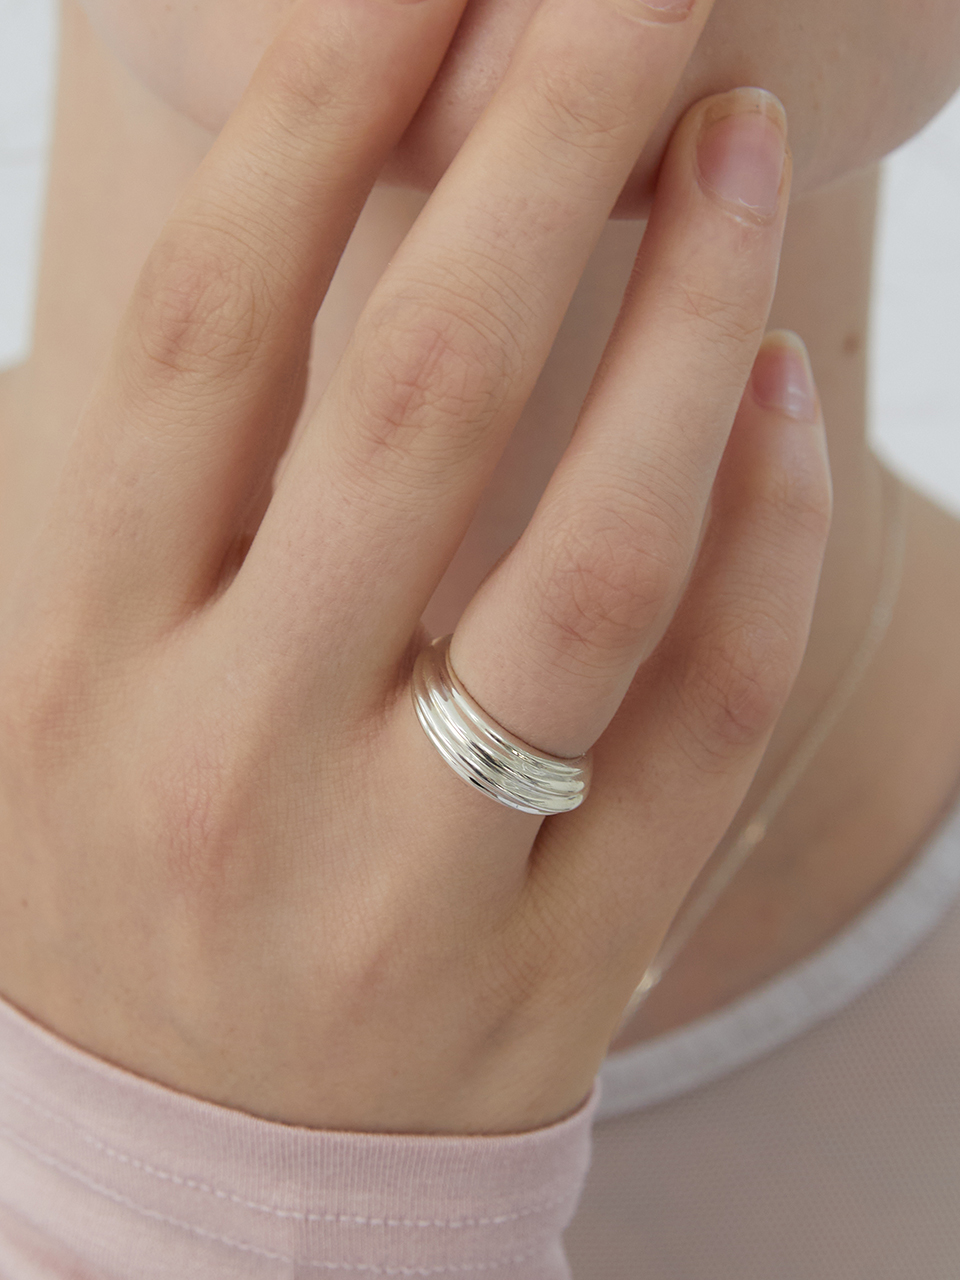 [silver925]Shell ring